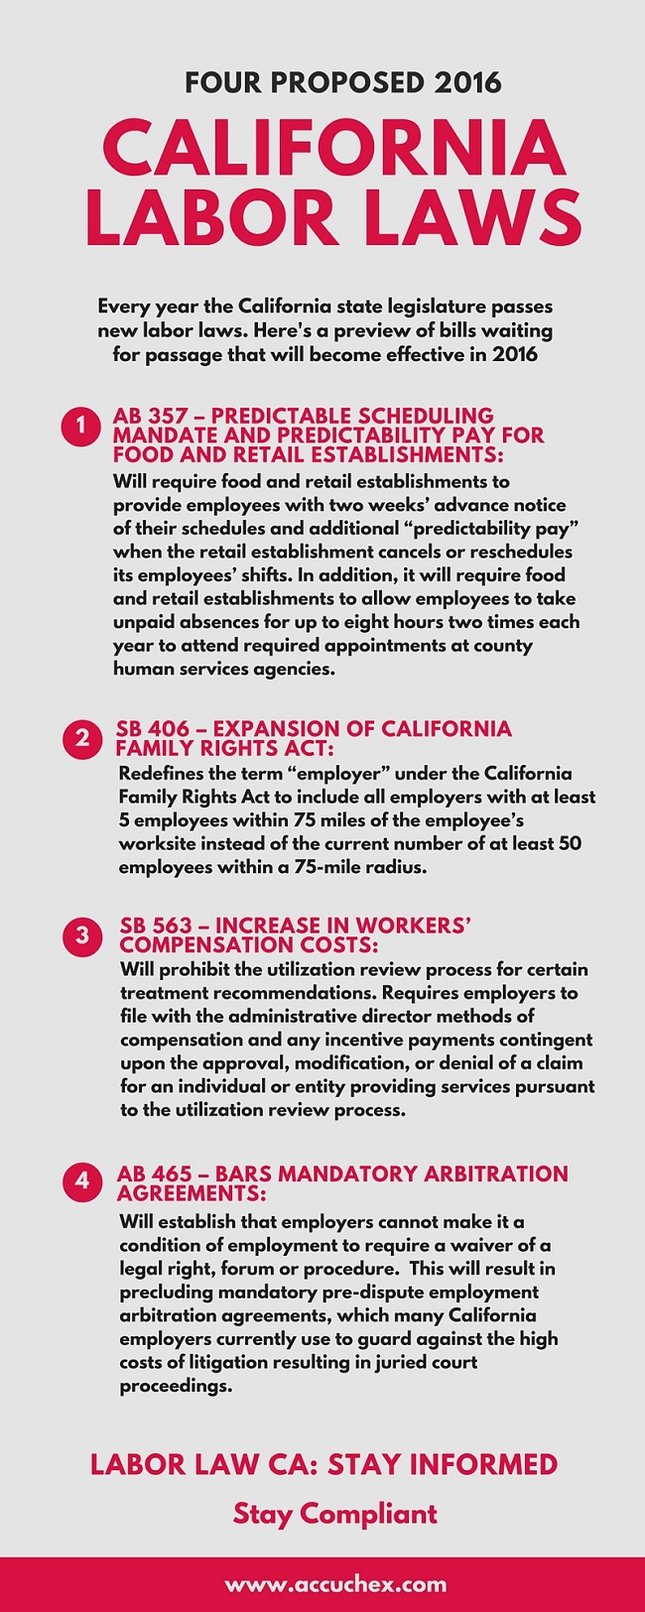 labor-law-ca-what-you-need-to-know-infographic